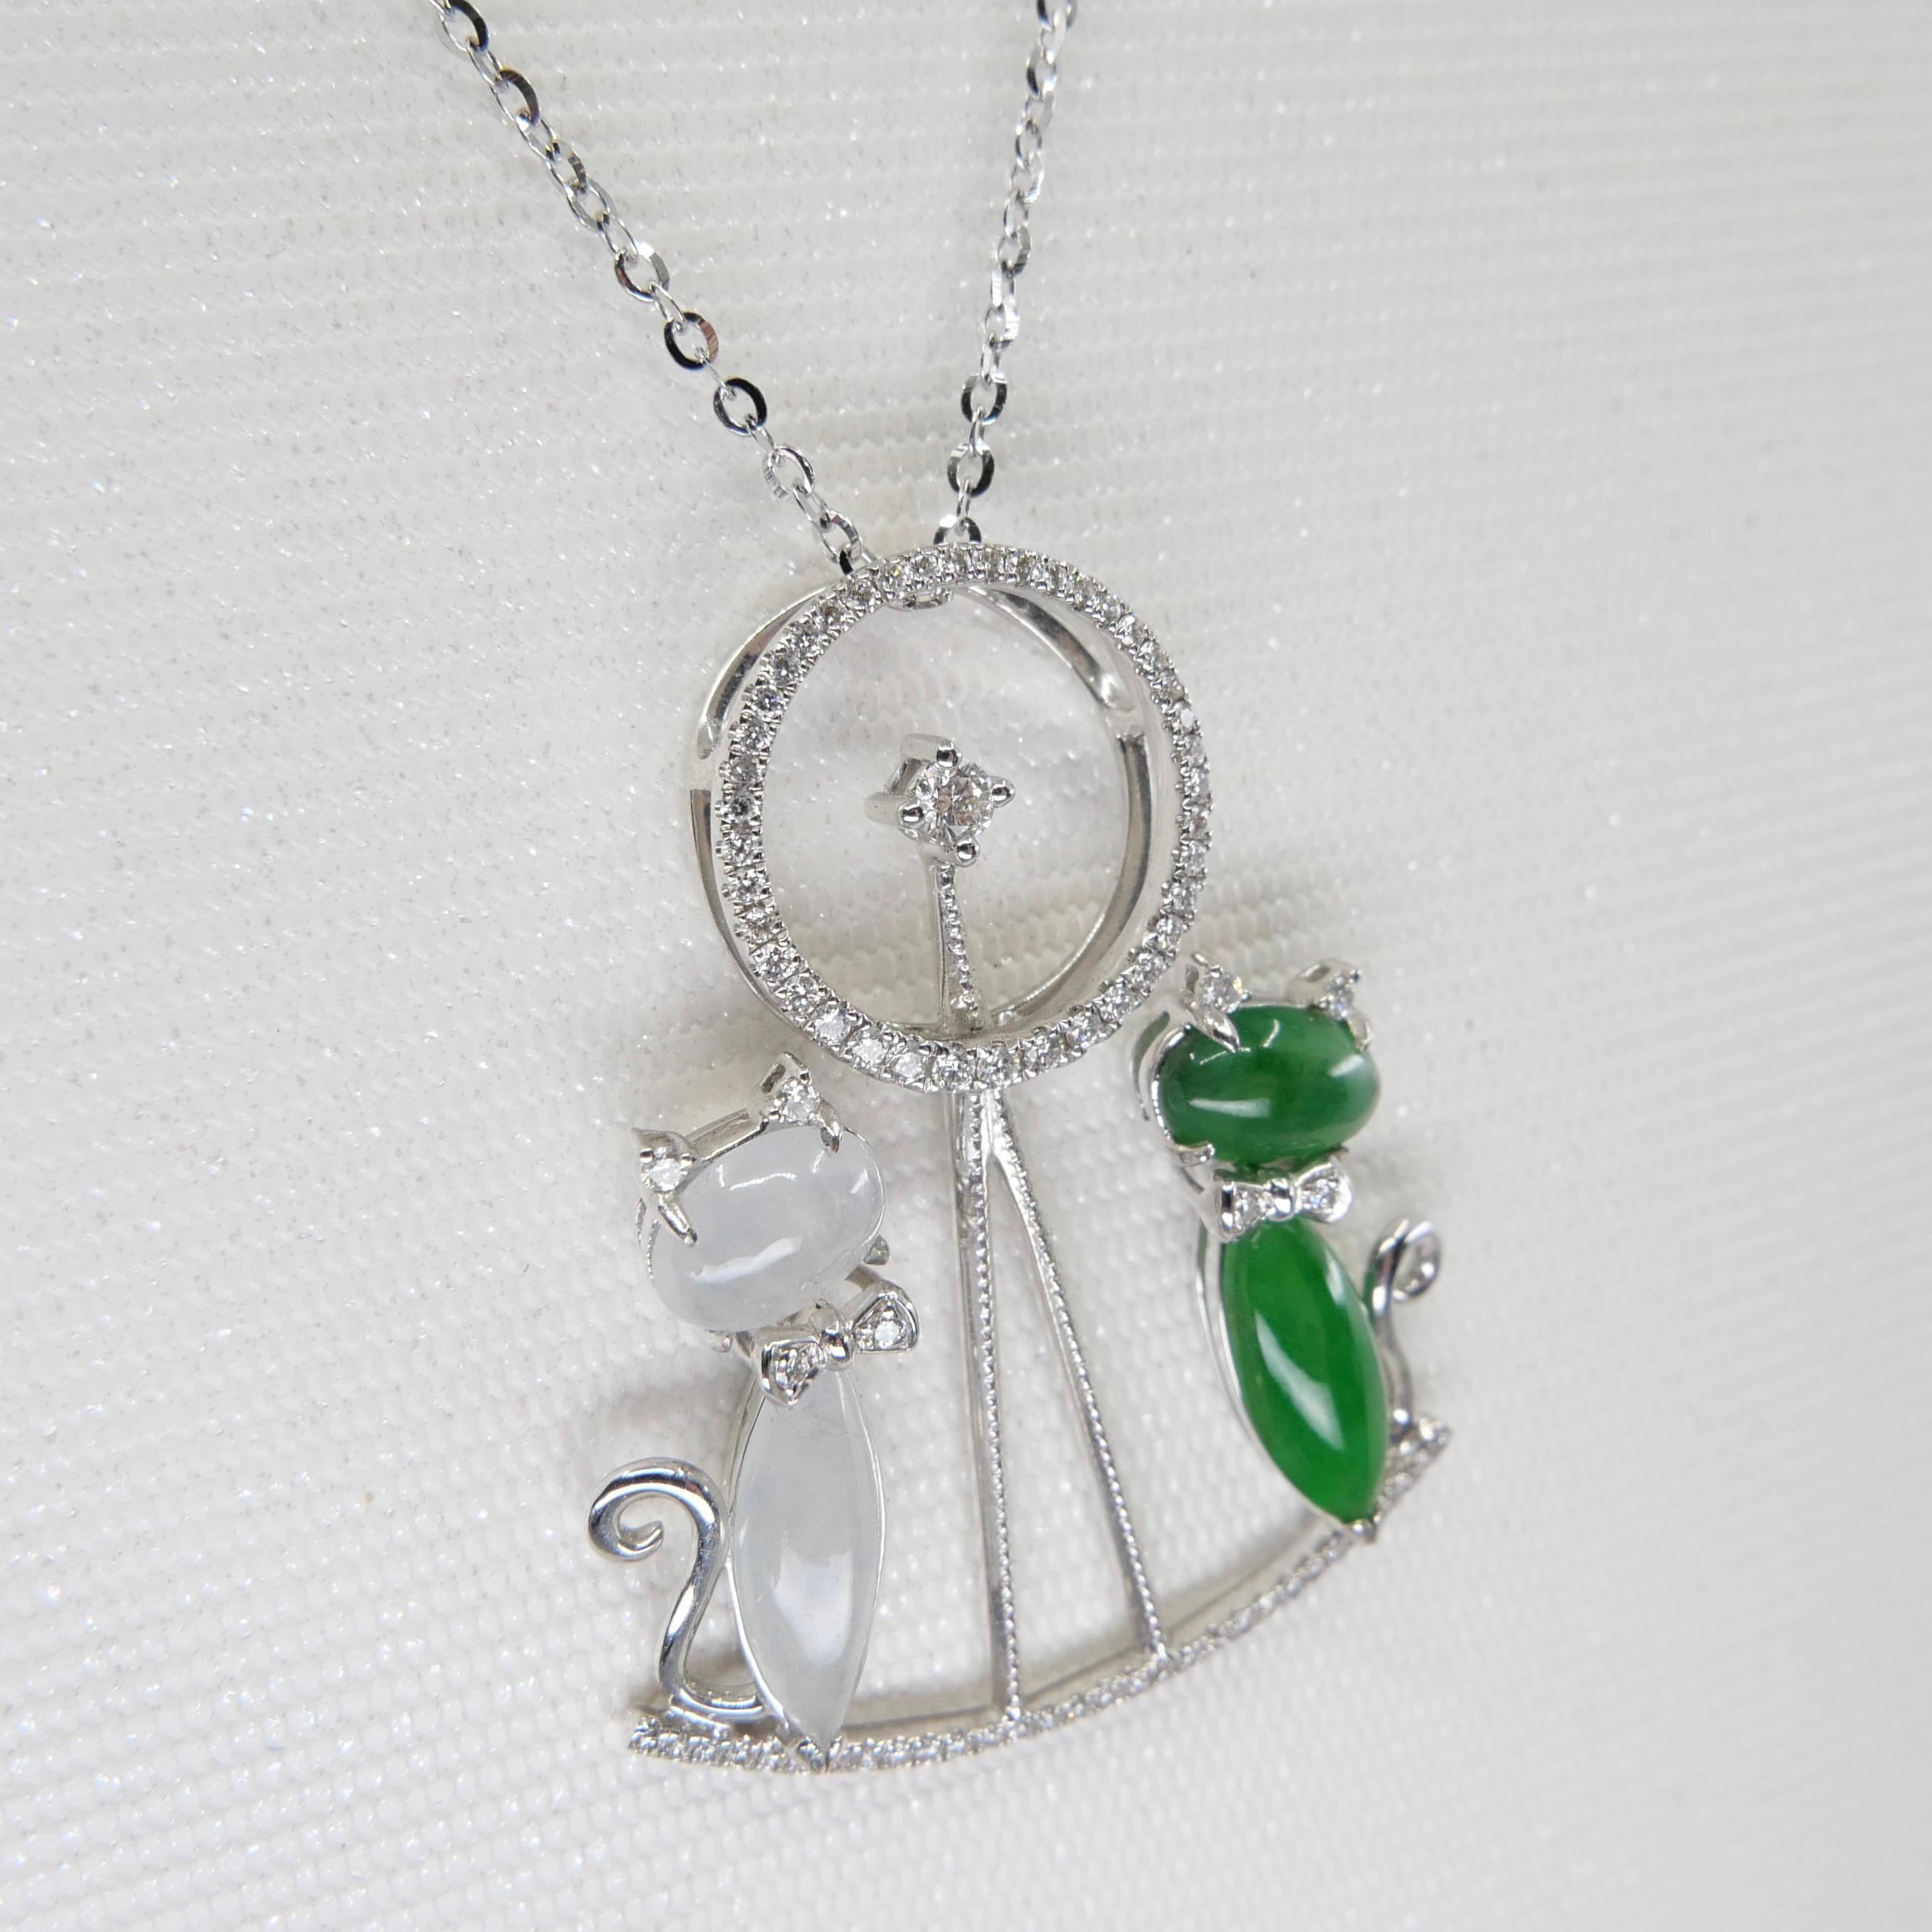 Certified Icy & Apple Green Jade & Diamond Pendant Necklace, Cats on a Seesaw For Sale 6